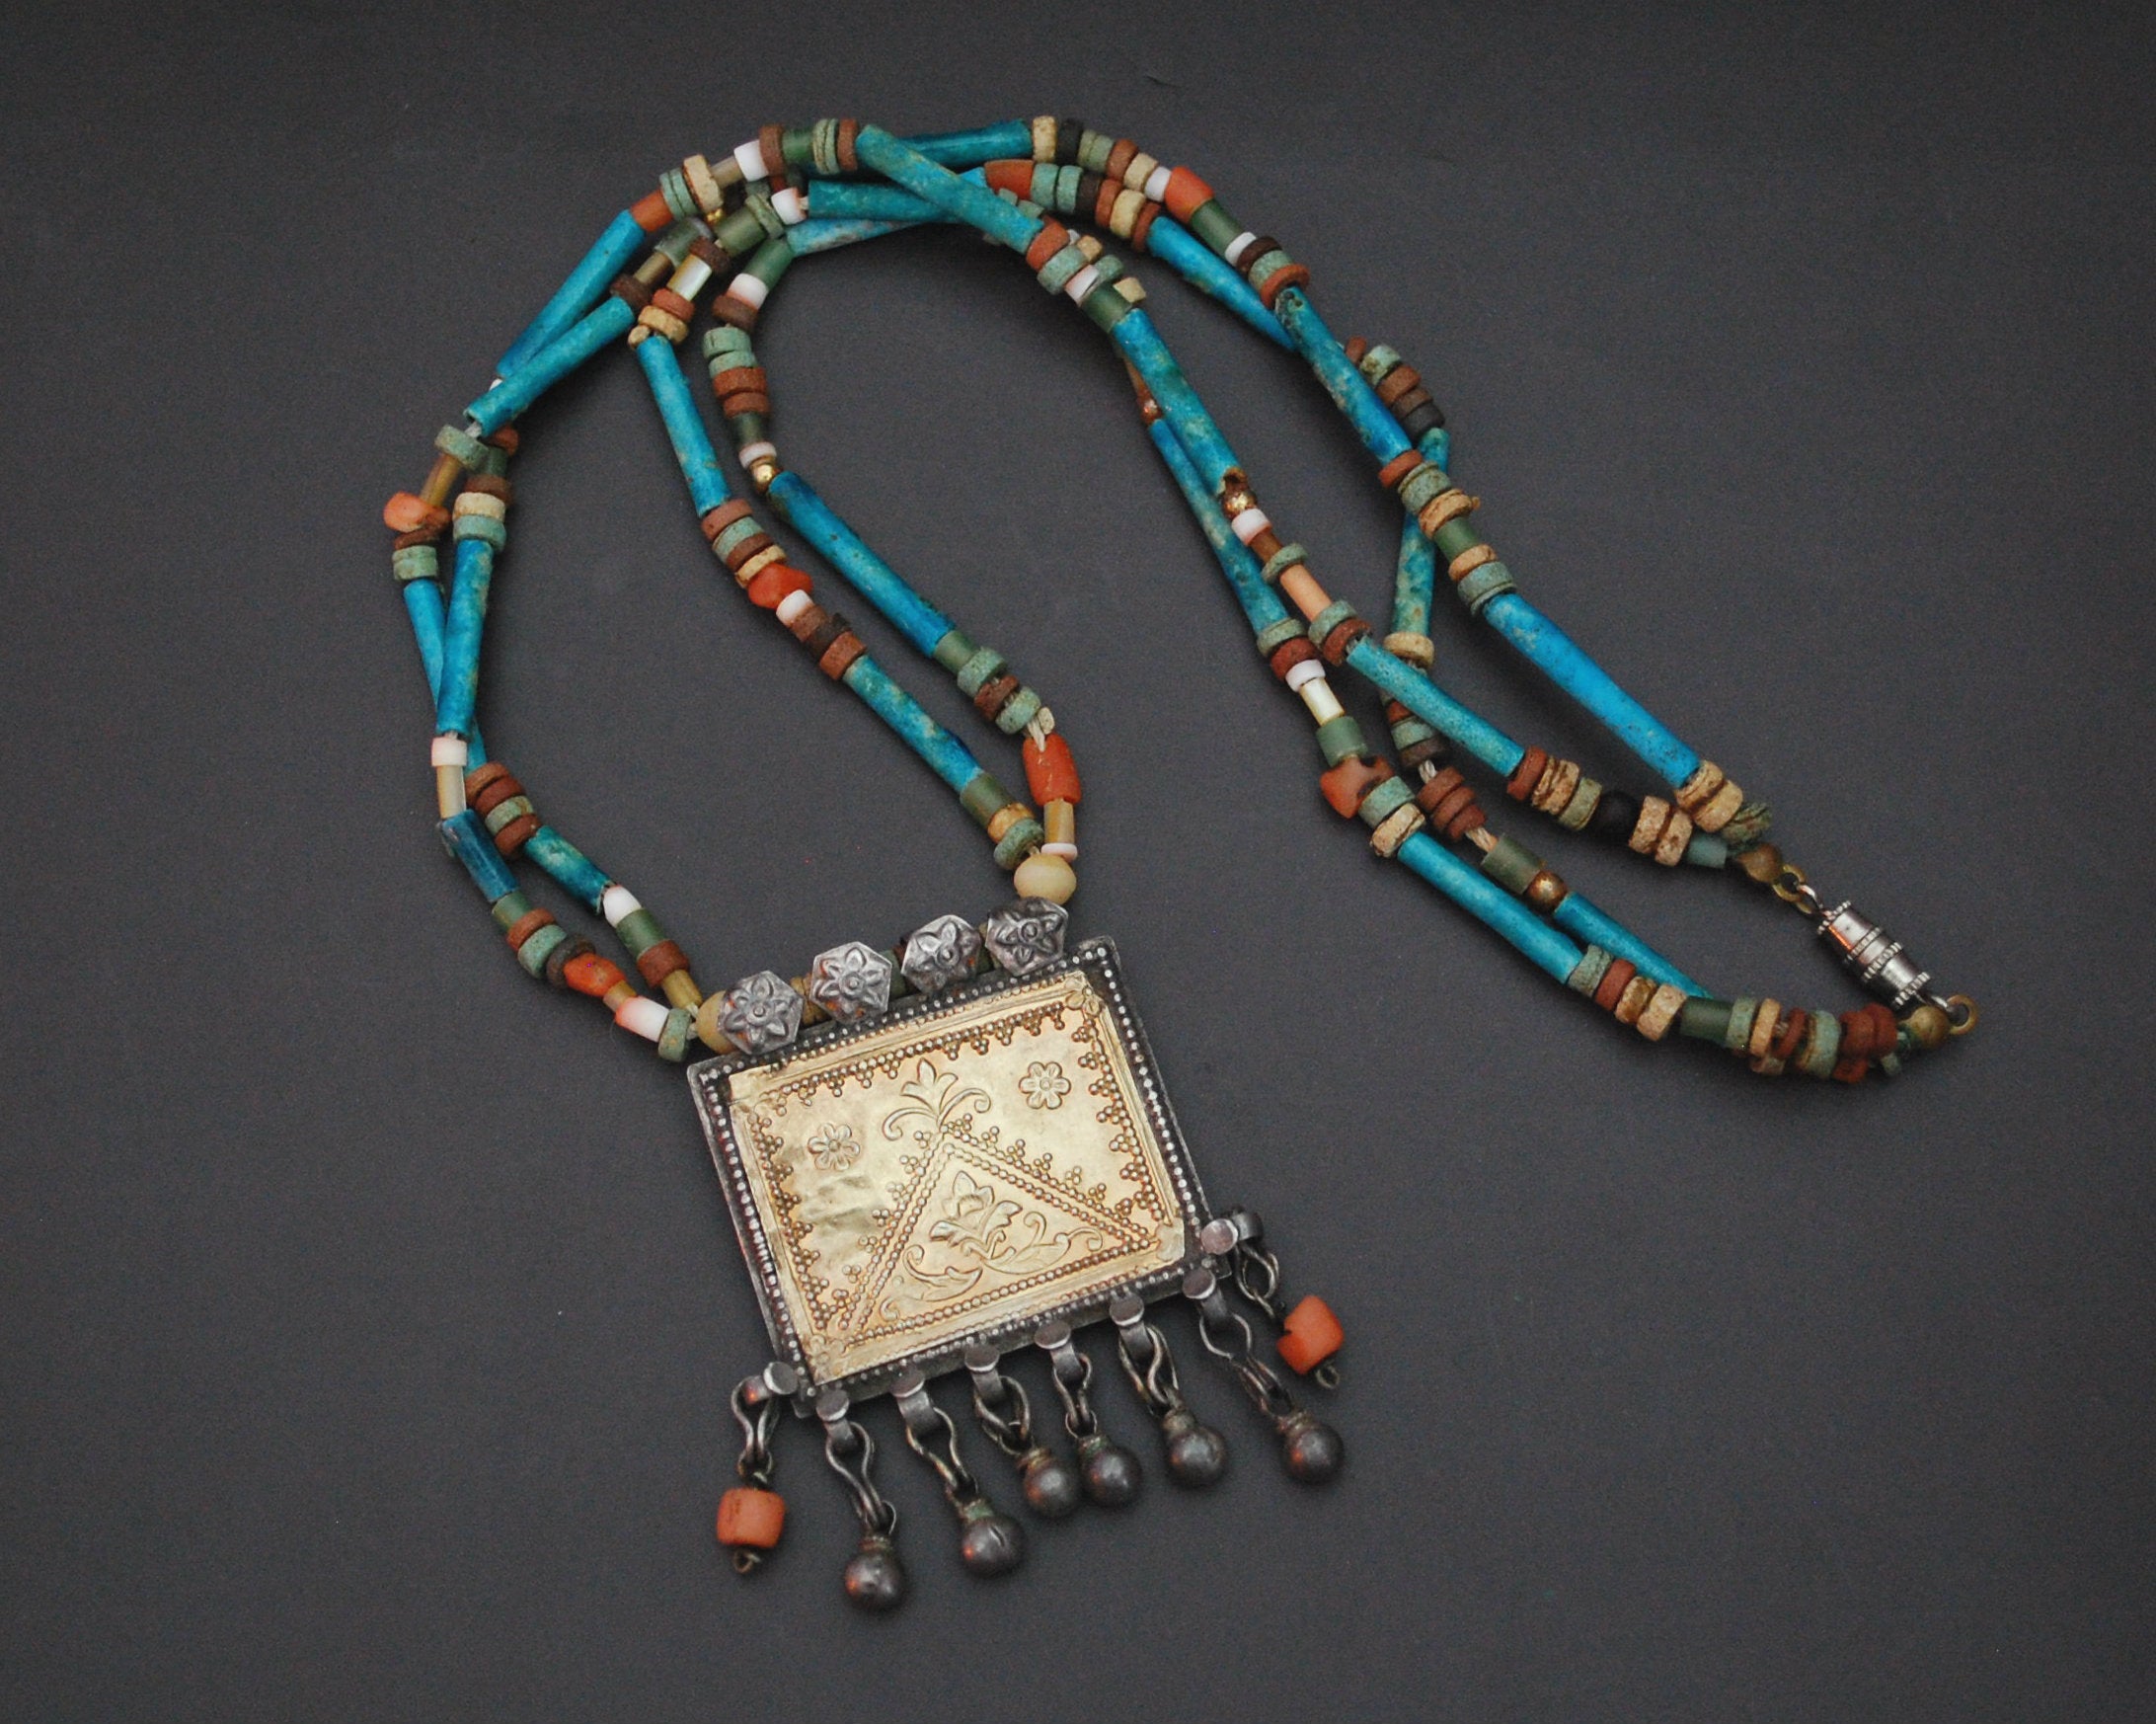 Antique Afghani Pendant and Faience Beads Necklace